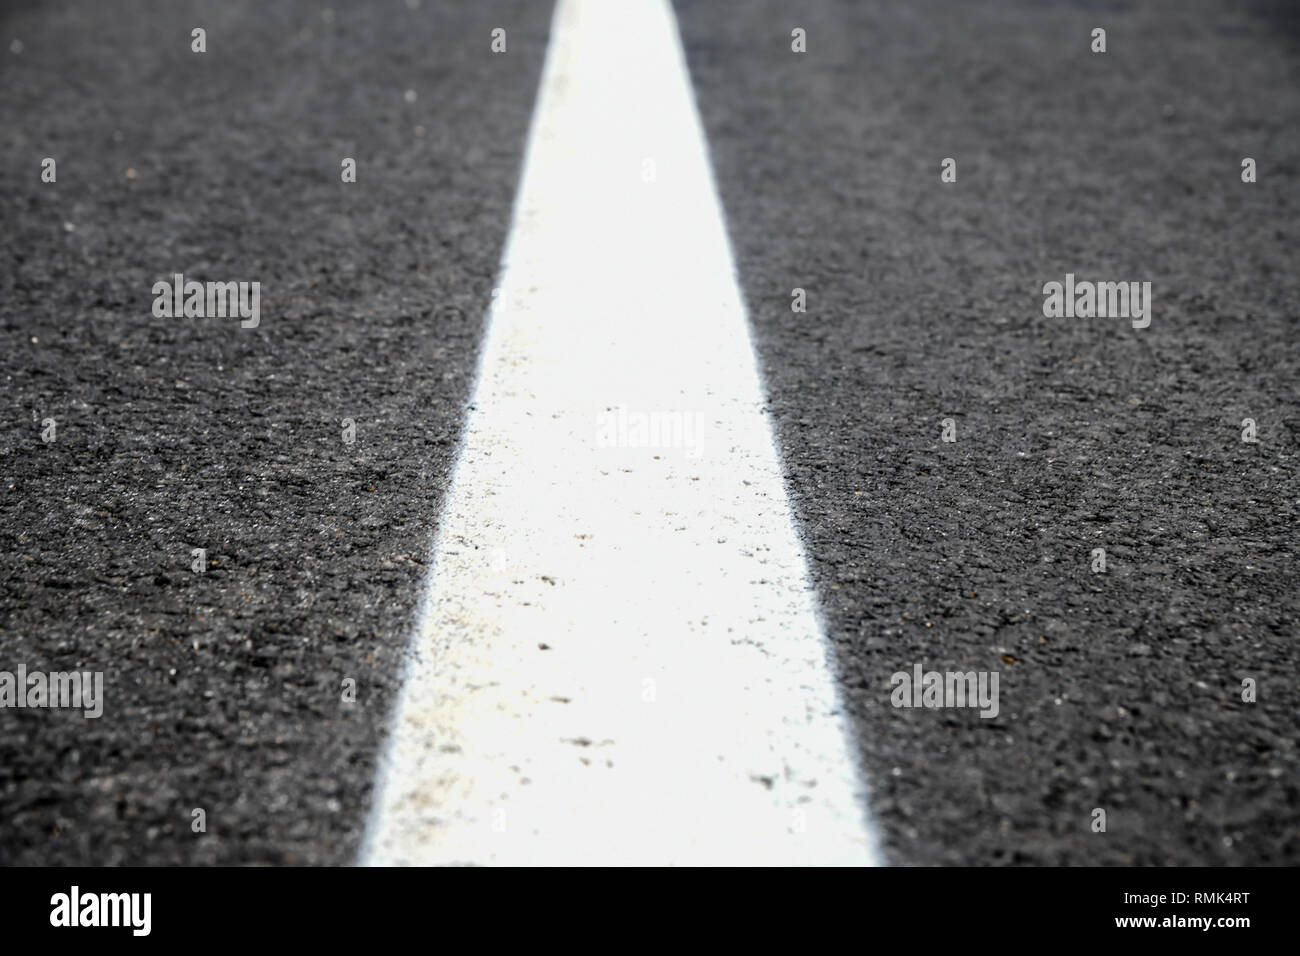 Asphalt road texture with white reflecting line. New road, surface a new asphalt highway Stock Photo